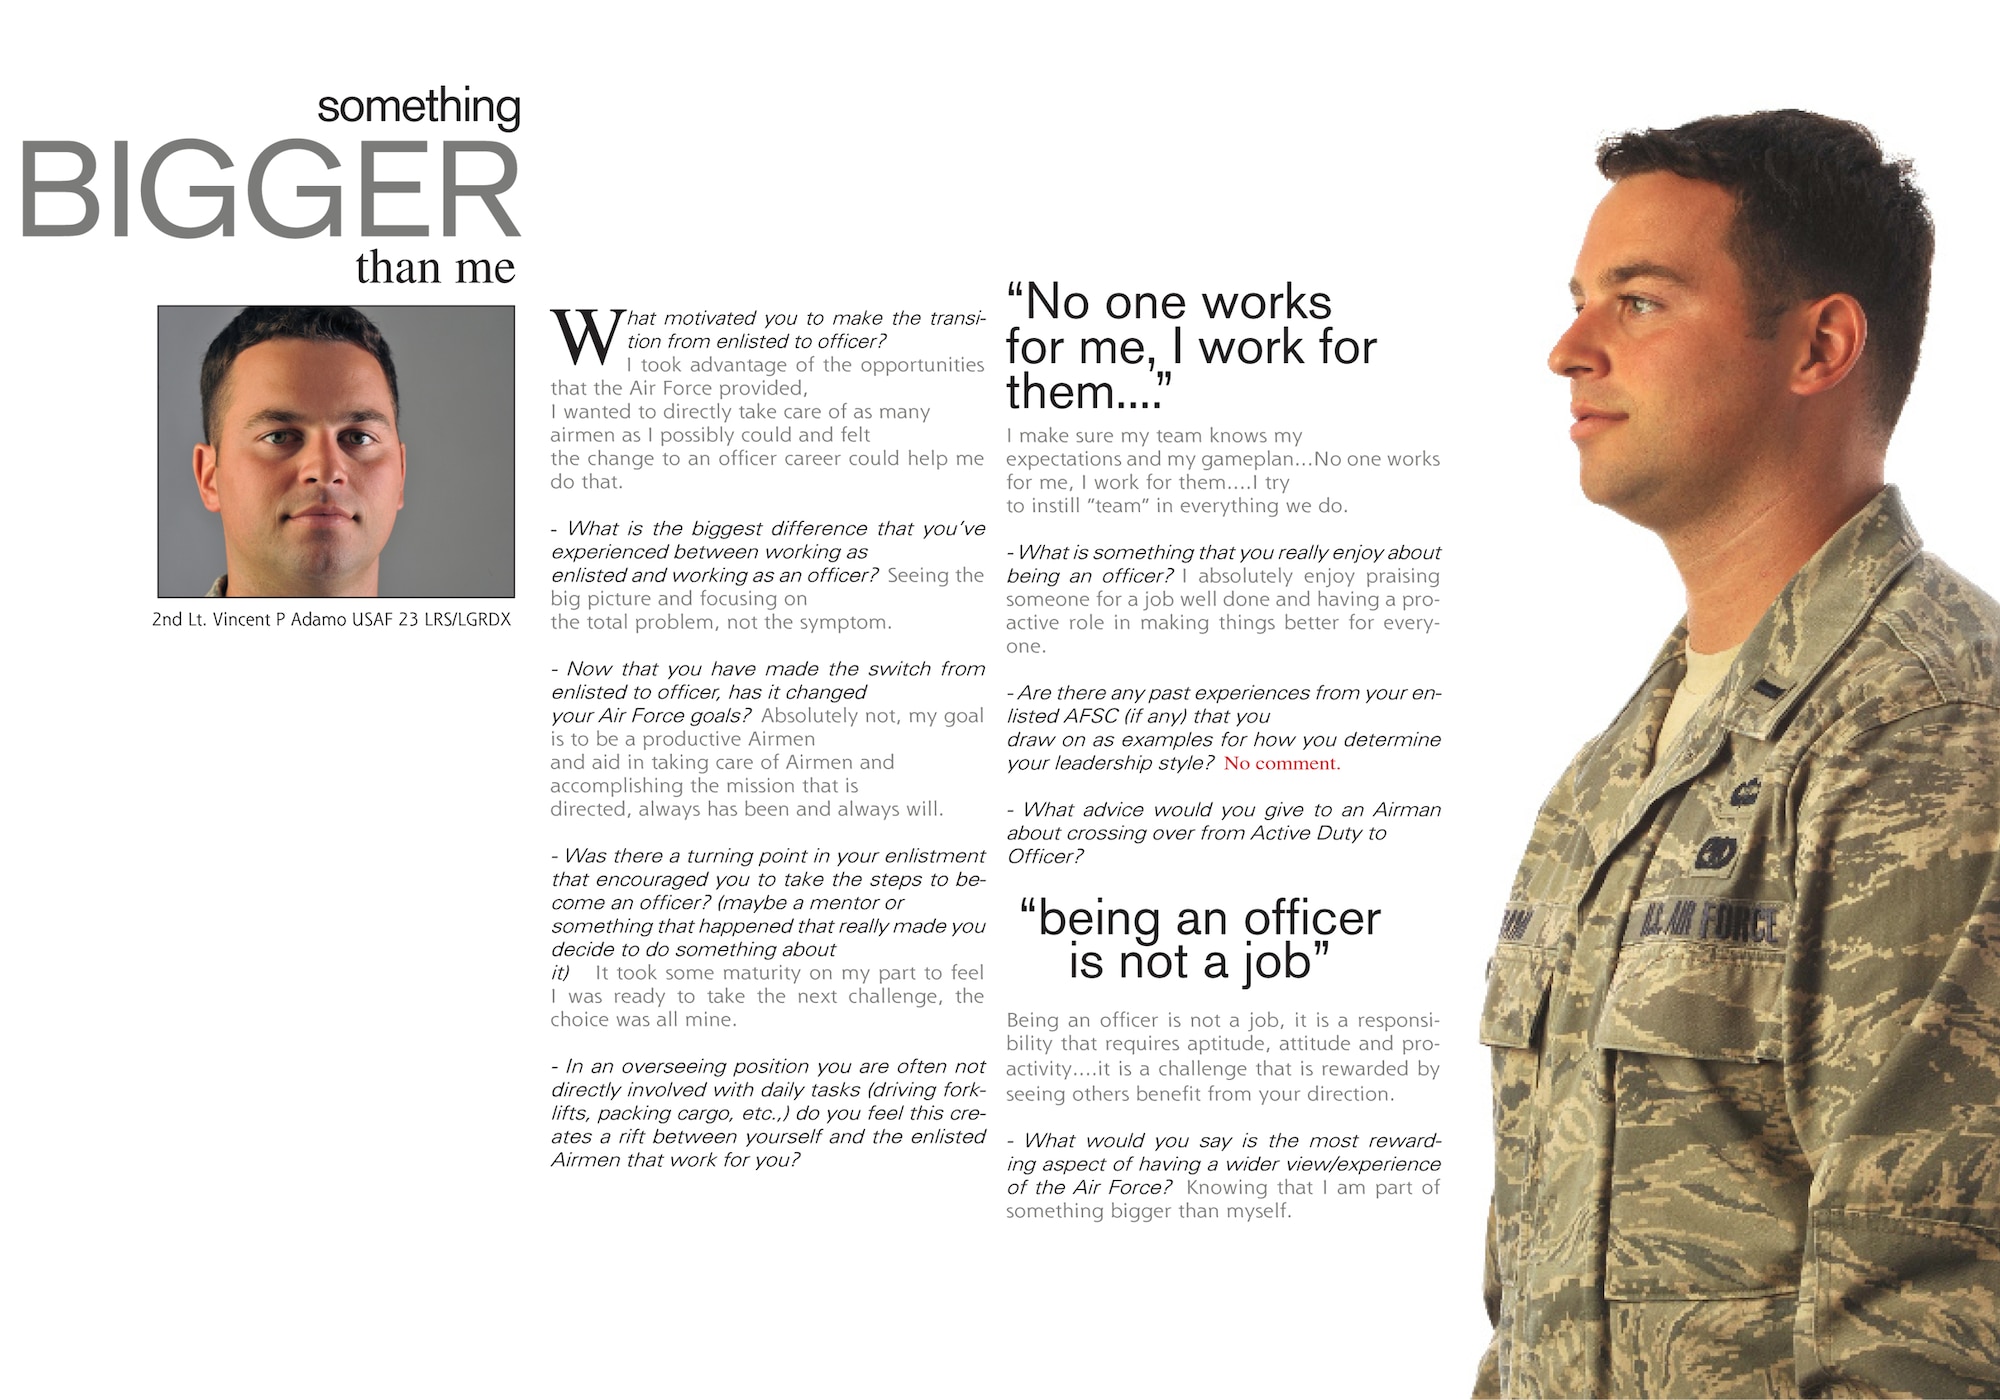 Combat experience preps Moody deployment officer > Moody Air Force Base >  Article Display